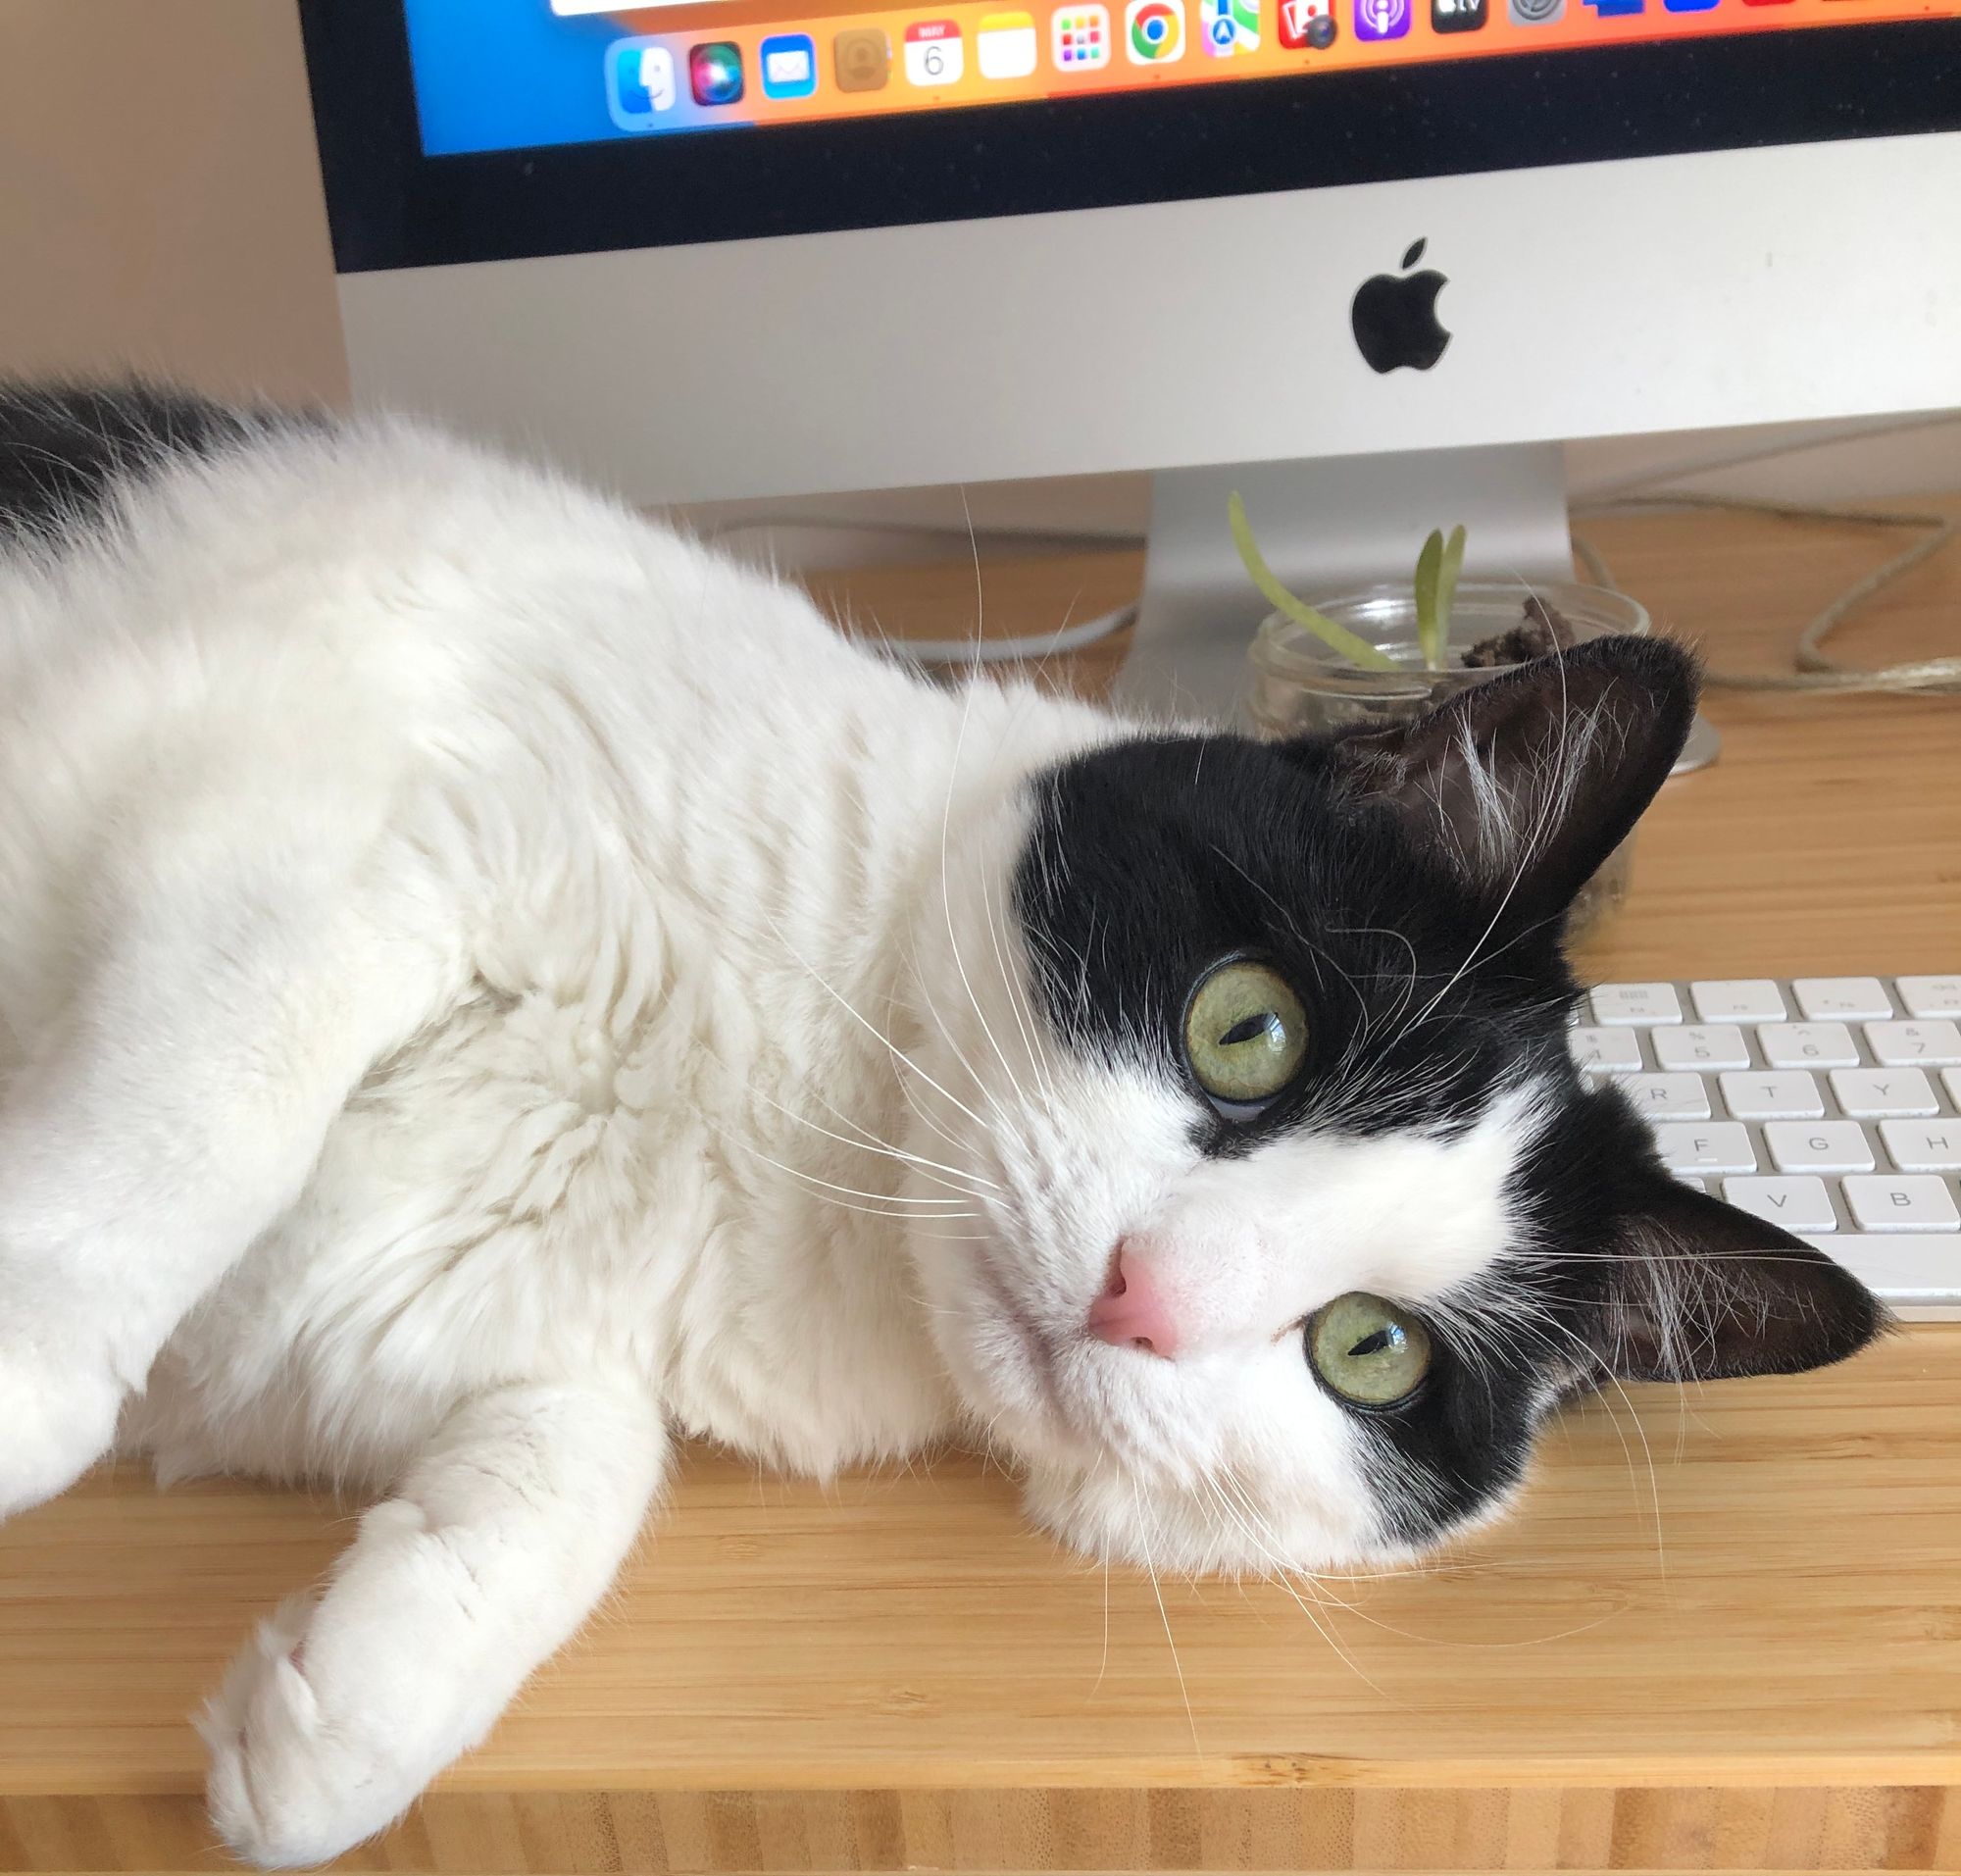 A black and white cat with a pink nose and green eyes is flopped on his side between the camera and the keyboard. In the background is a small sad aloe plant and the bottom left corner of a mac computer. 